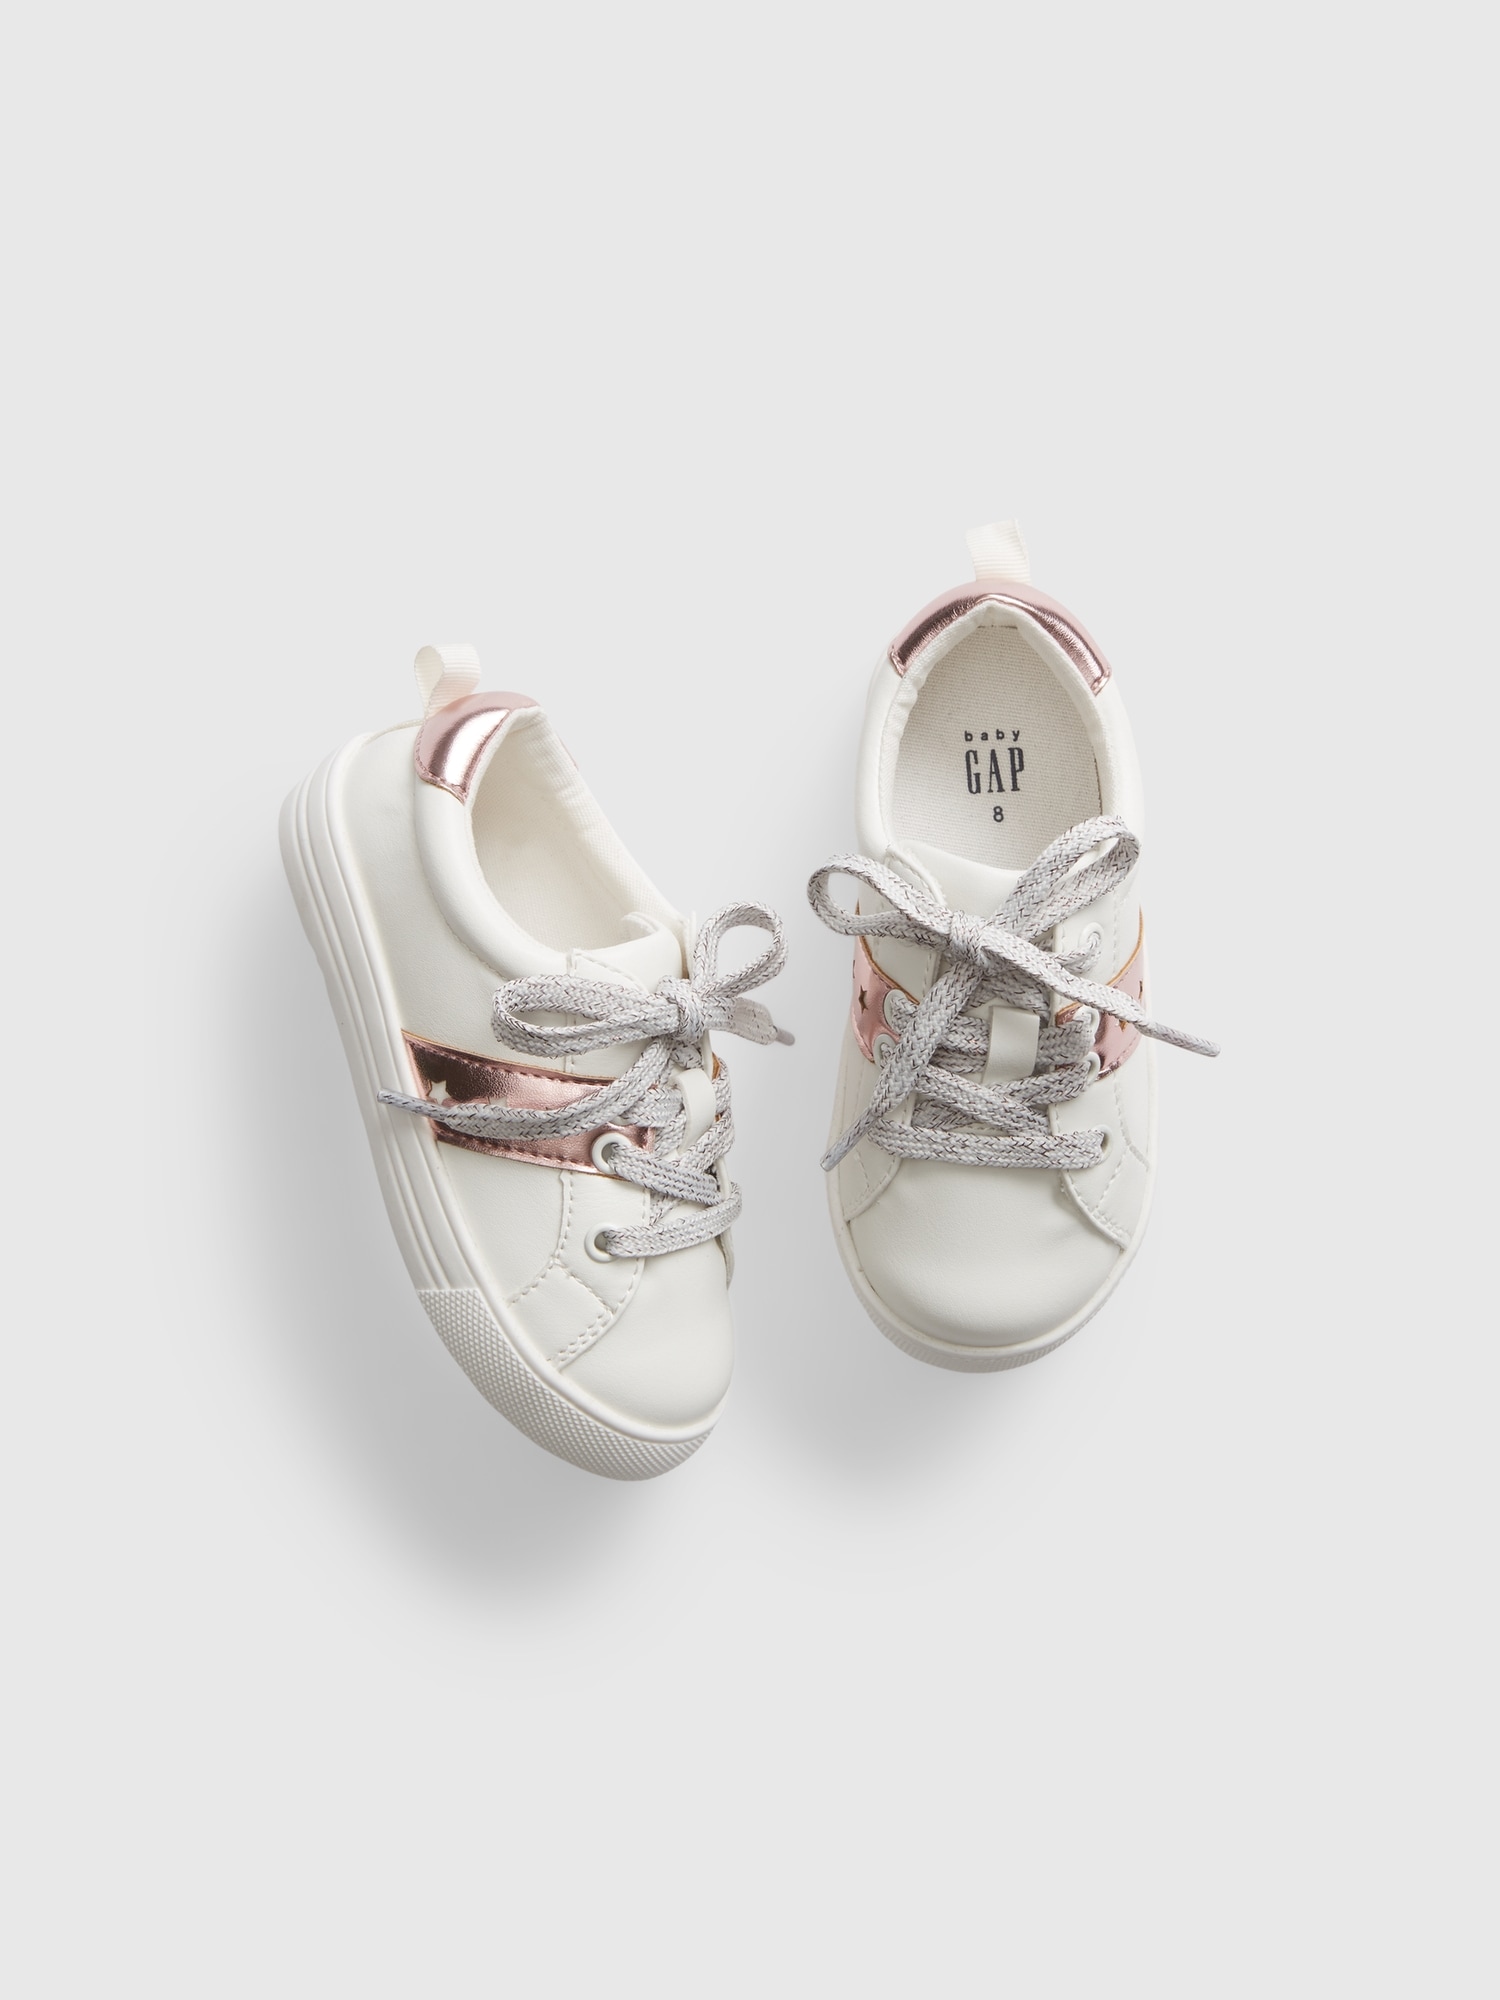 Gap Babies' Toddler Star Sneakers In Off White